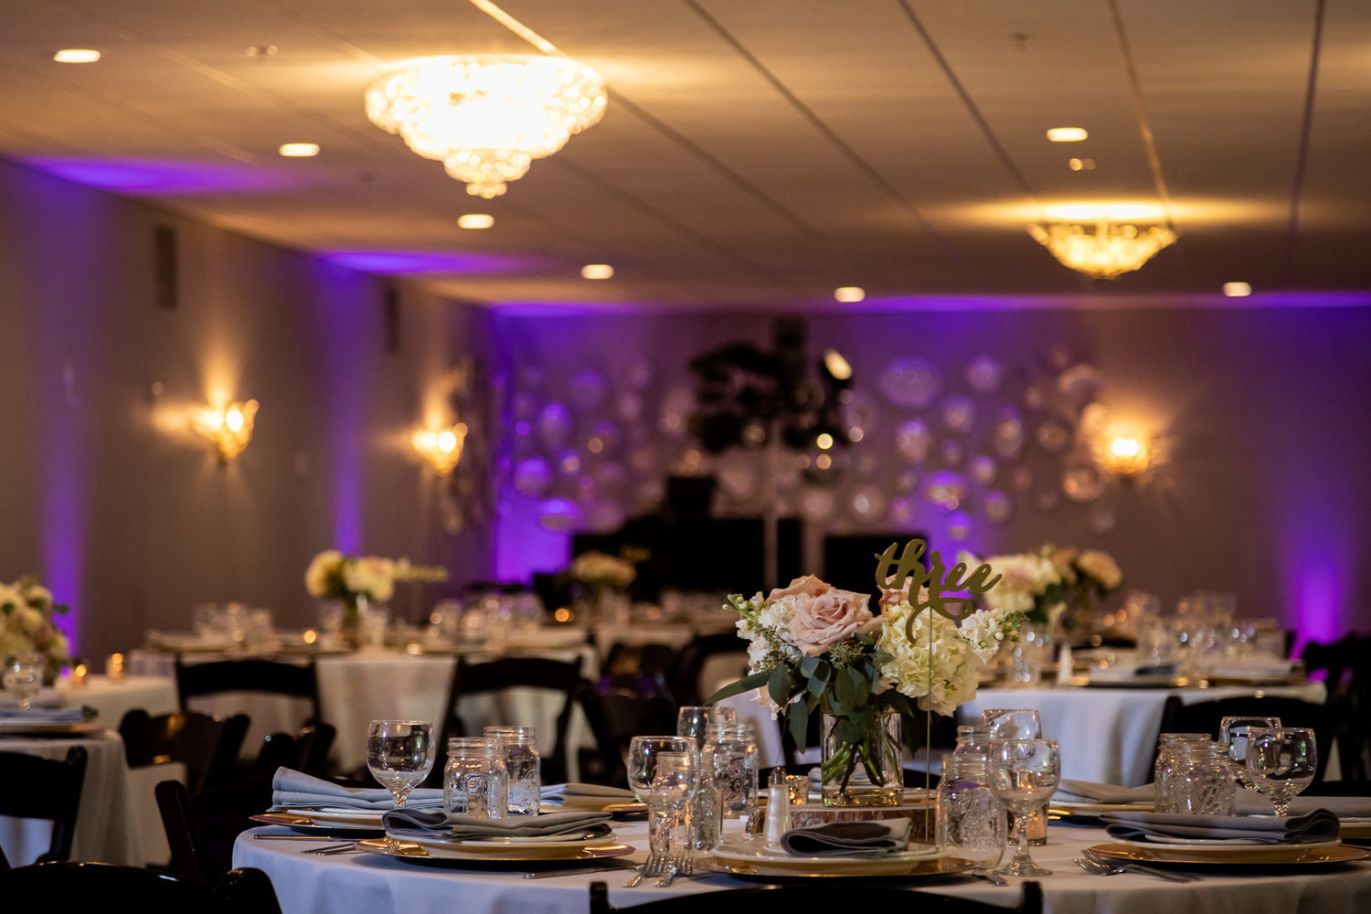 Stonegate Manor & Gardens Michigan wedding venue - wedding tables with pale pink flowers, purple uplighting and black folding chairs